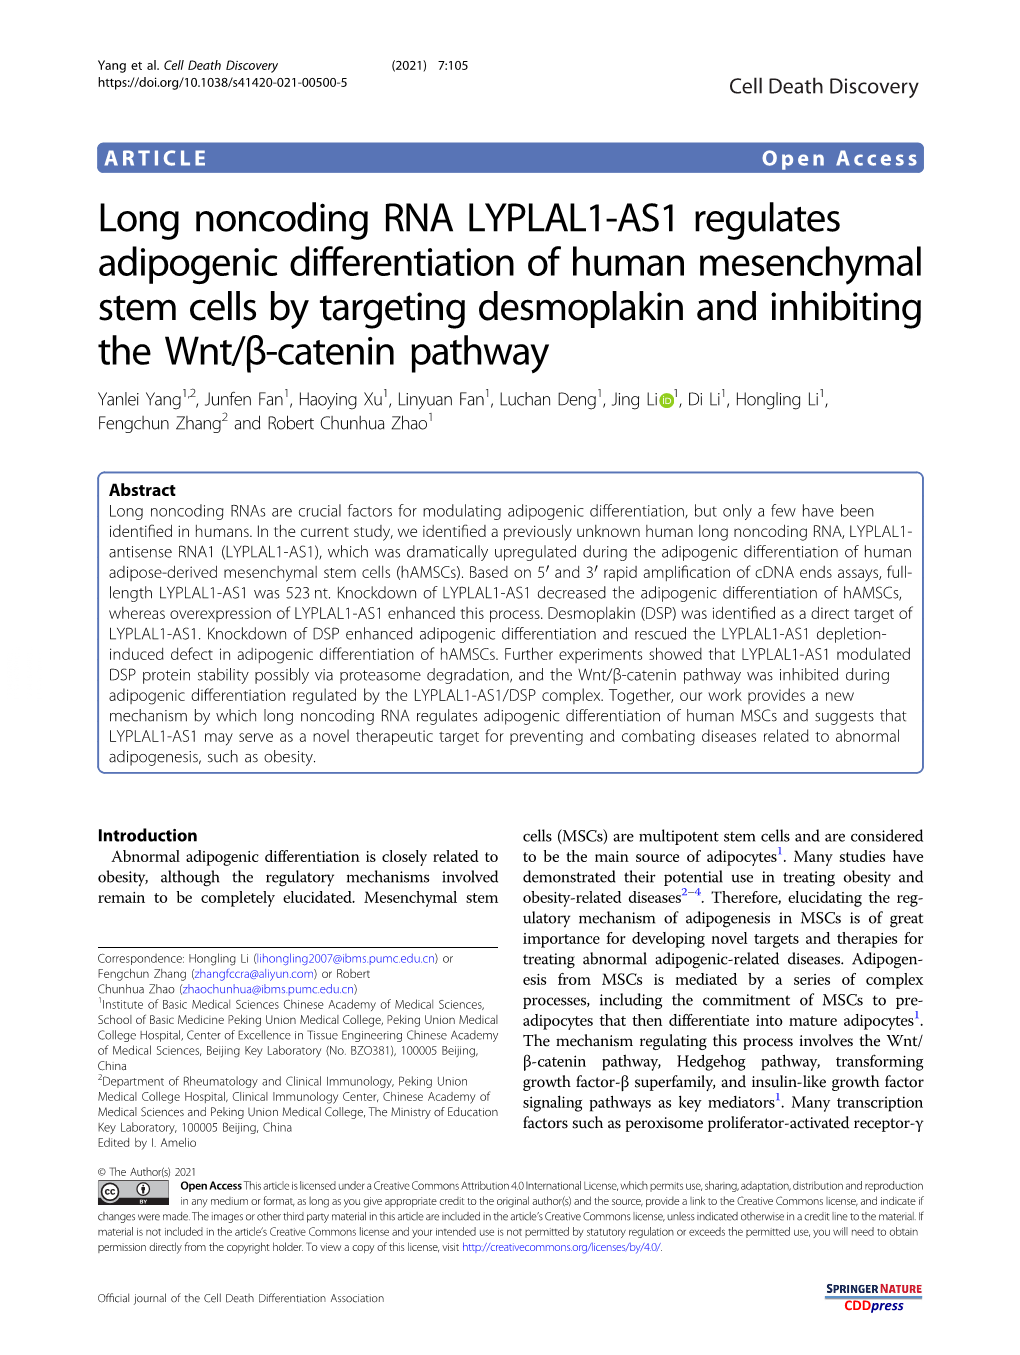 Long Noncoding RNA LYPLAL1-AS1 Regulates Adipogenic Differentiation